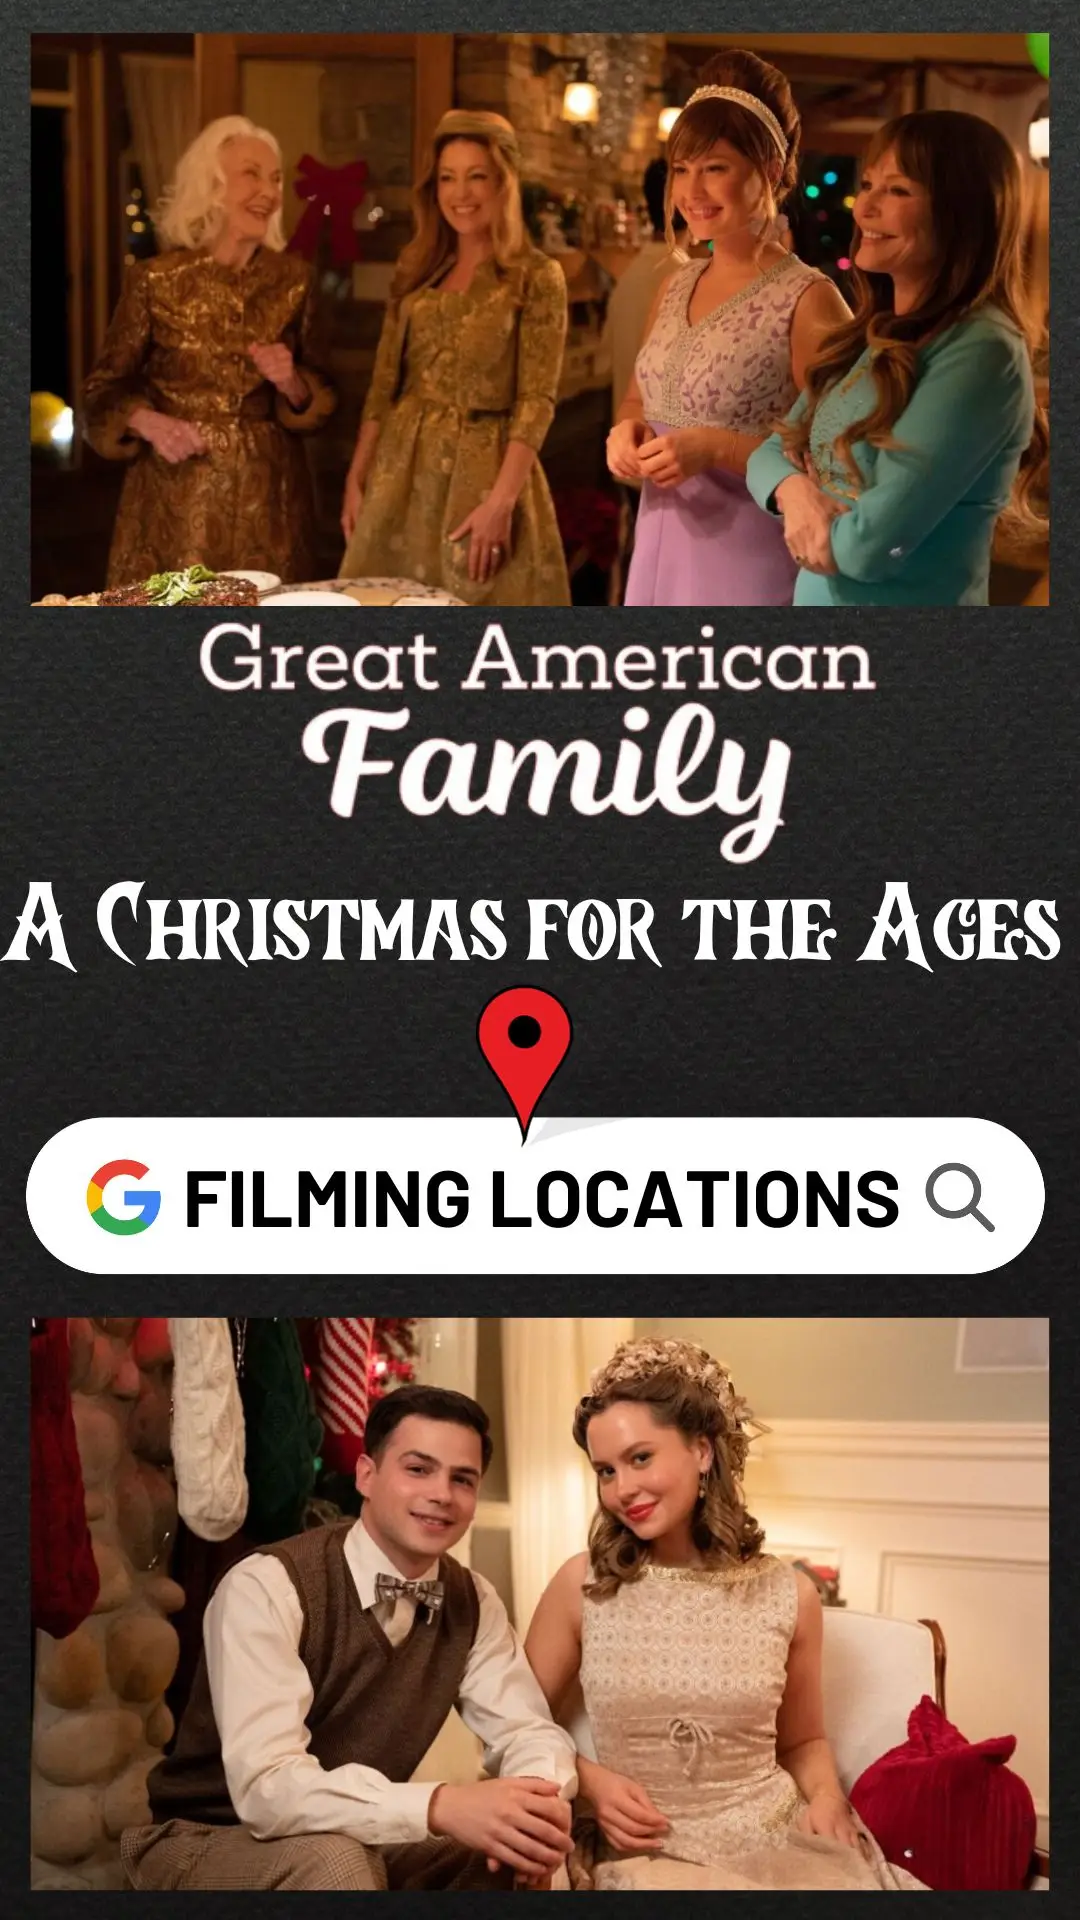 A Christmas for the Ages Filming Locations